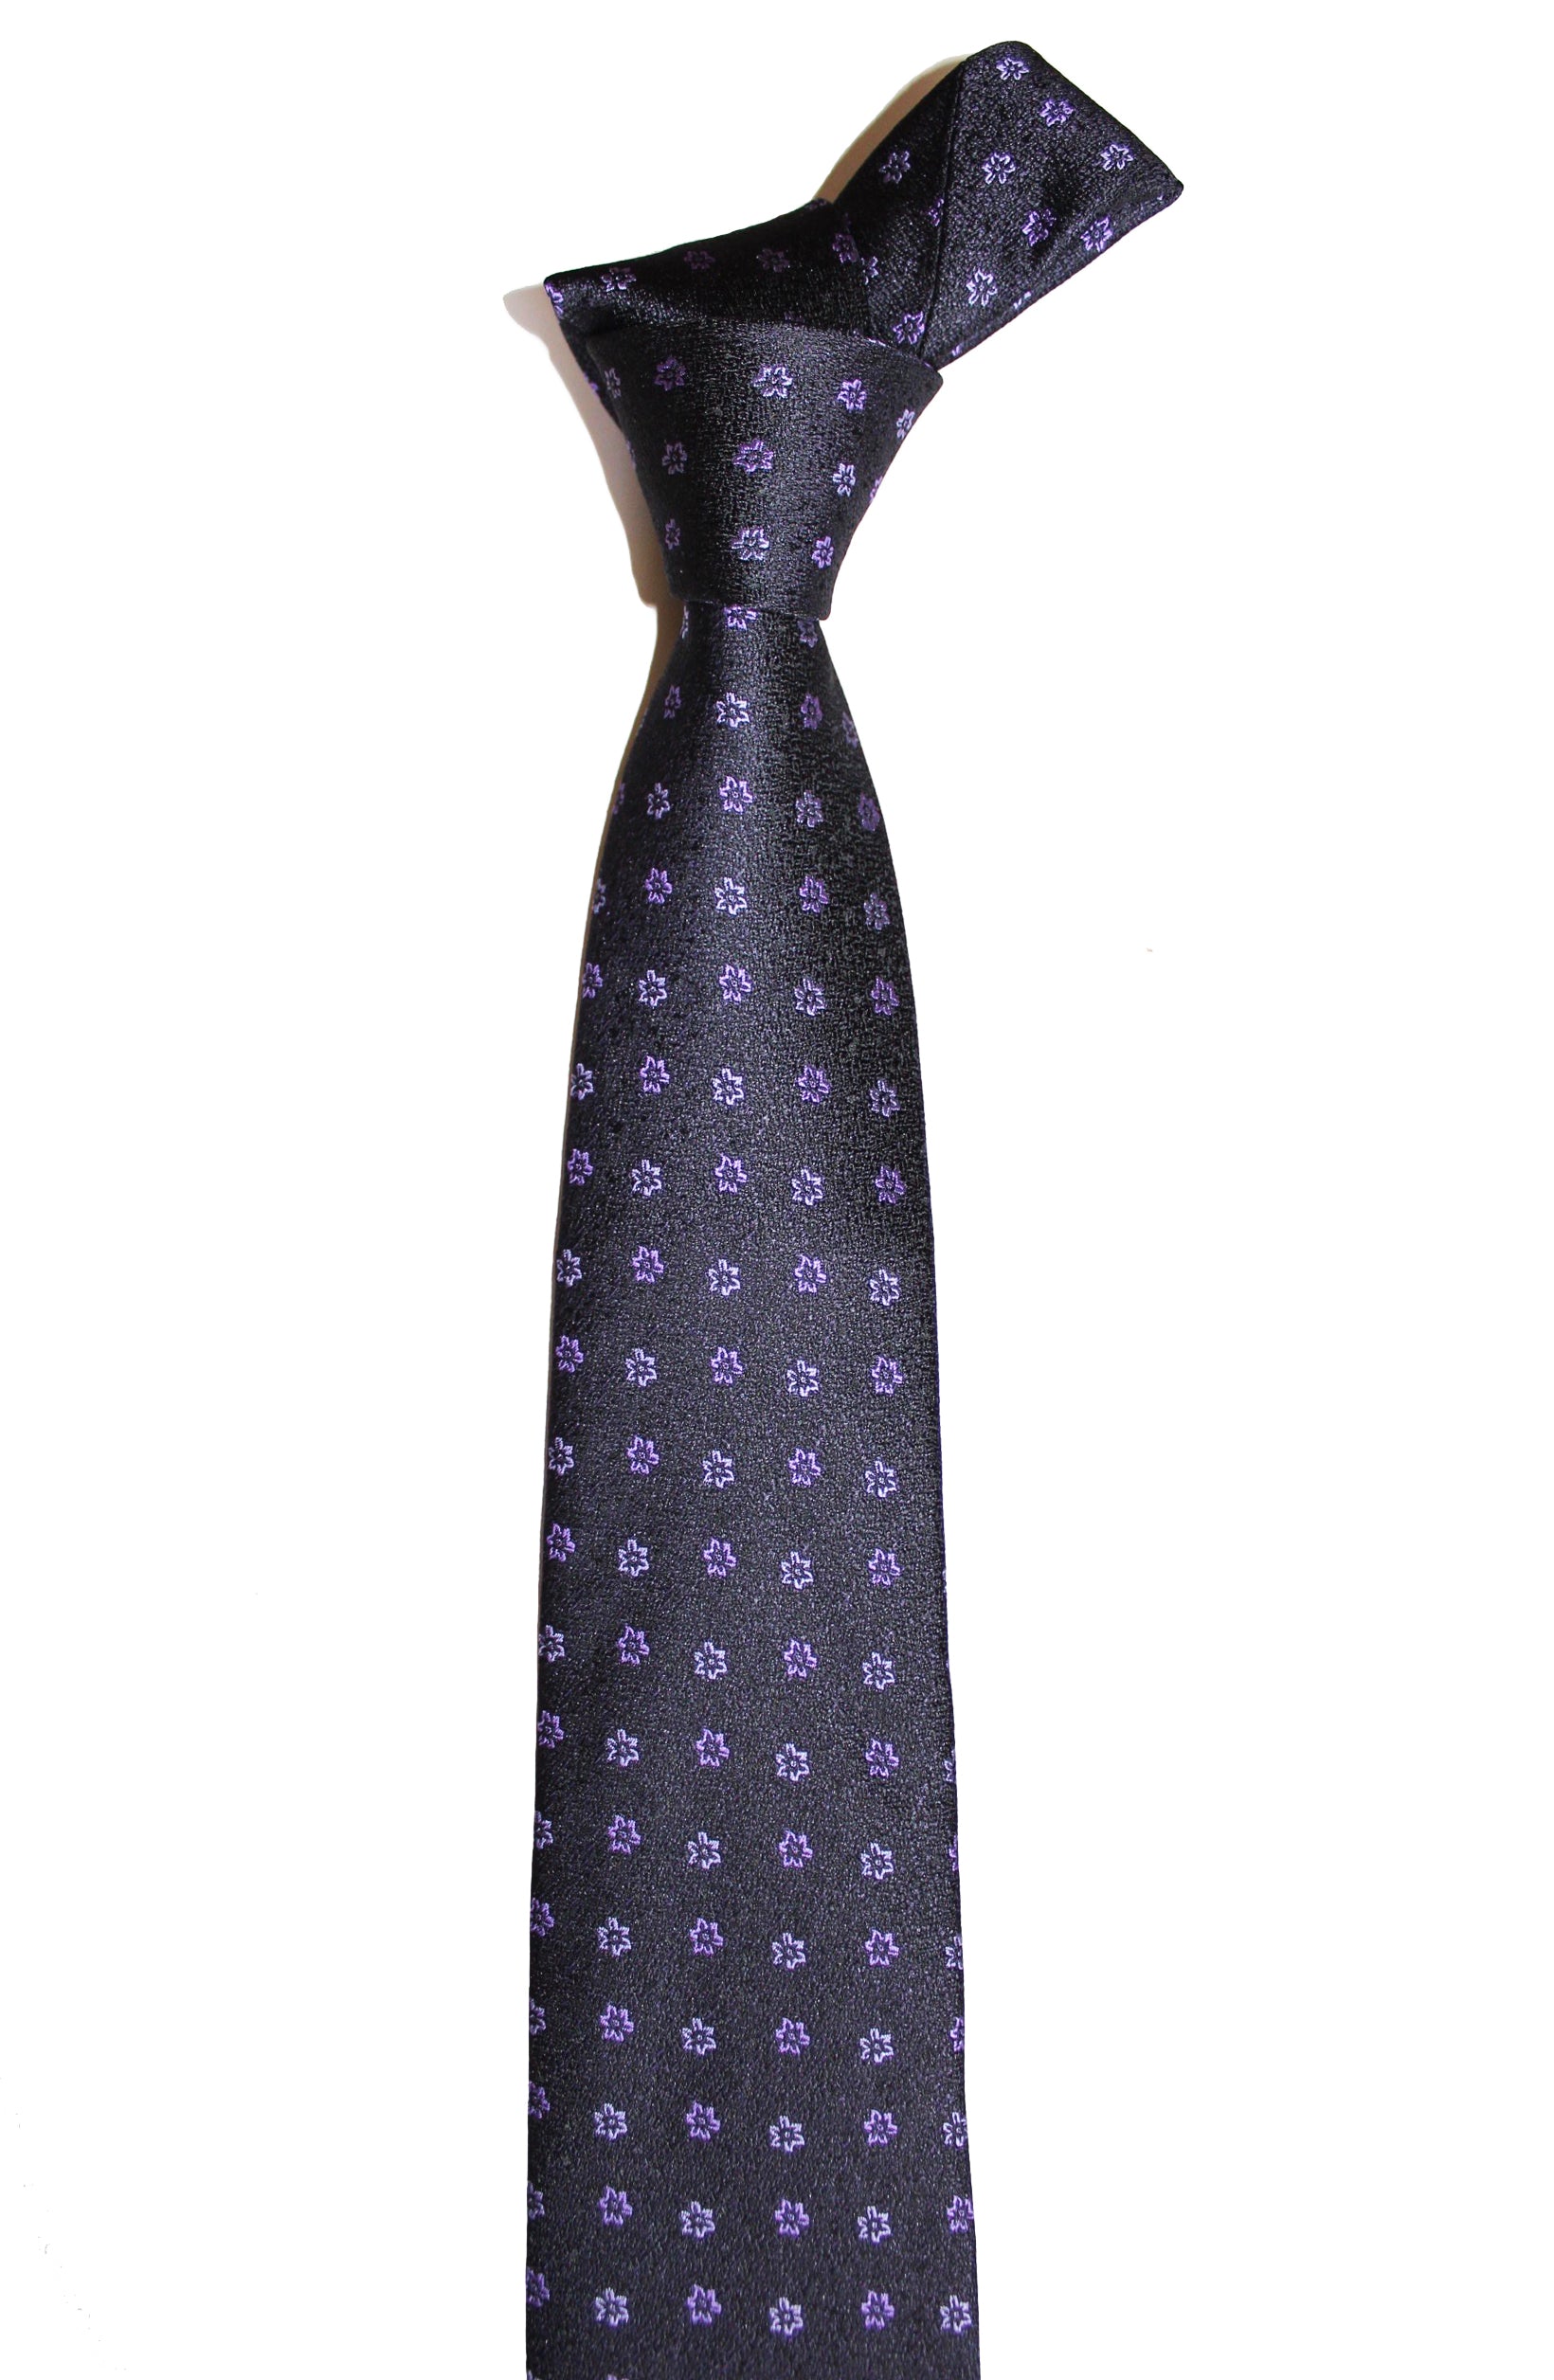 Ying Cai Norrian Tie /Black 2